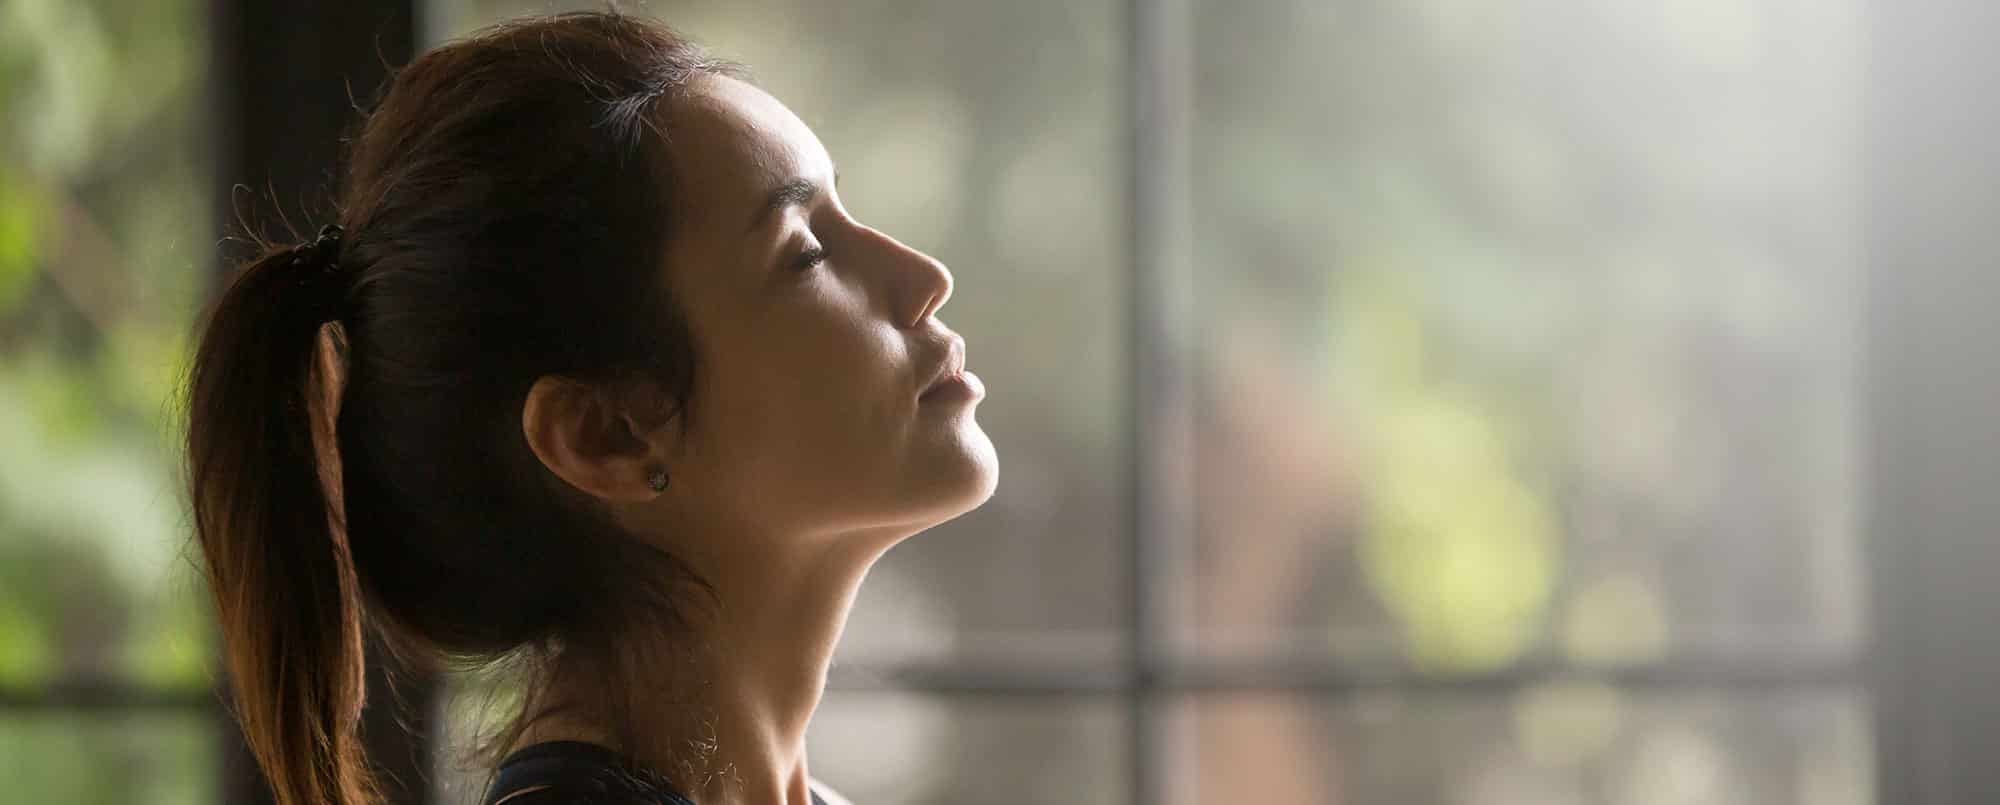 Profile of brown haired woman closing her eyes and putting face towards the sky